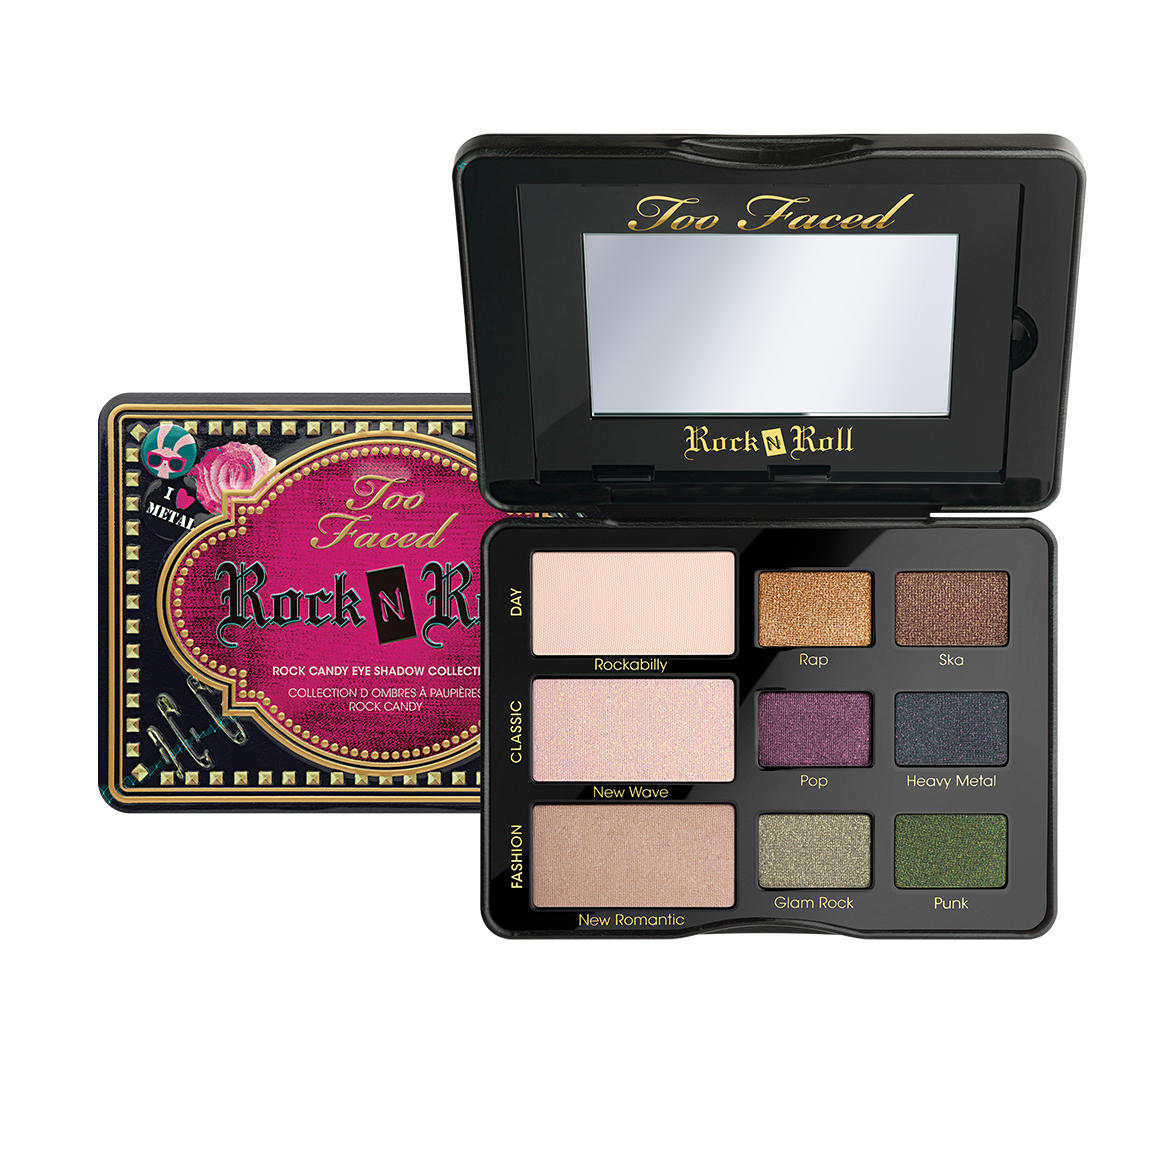 Too Faced Rock n' Roll Palette